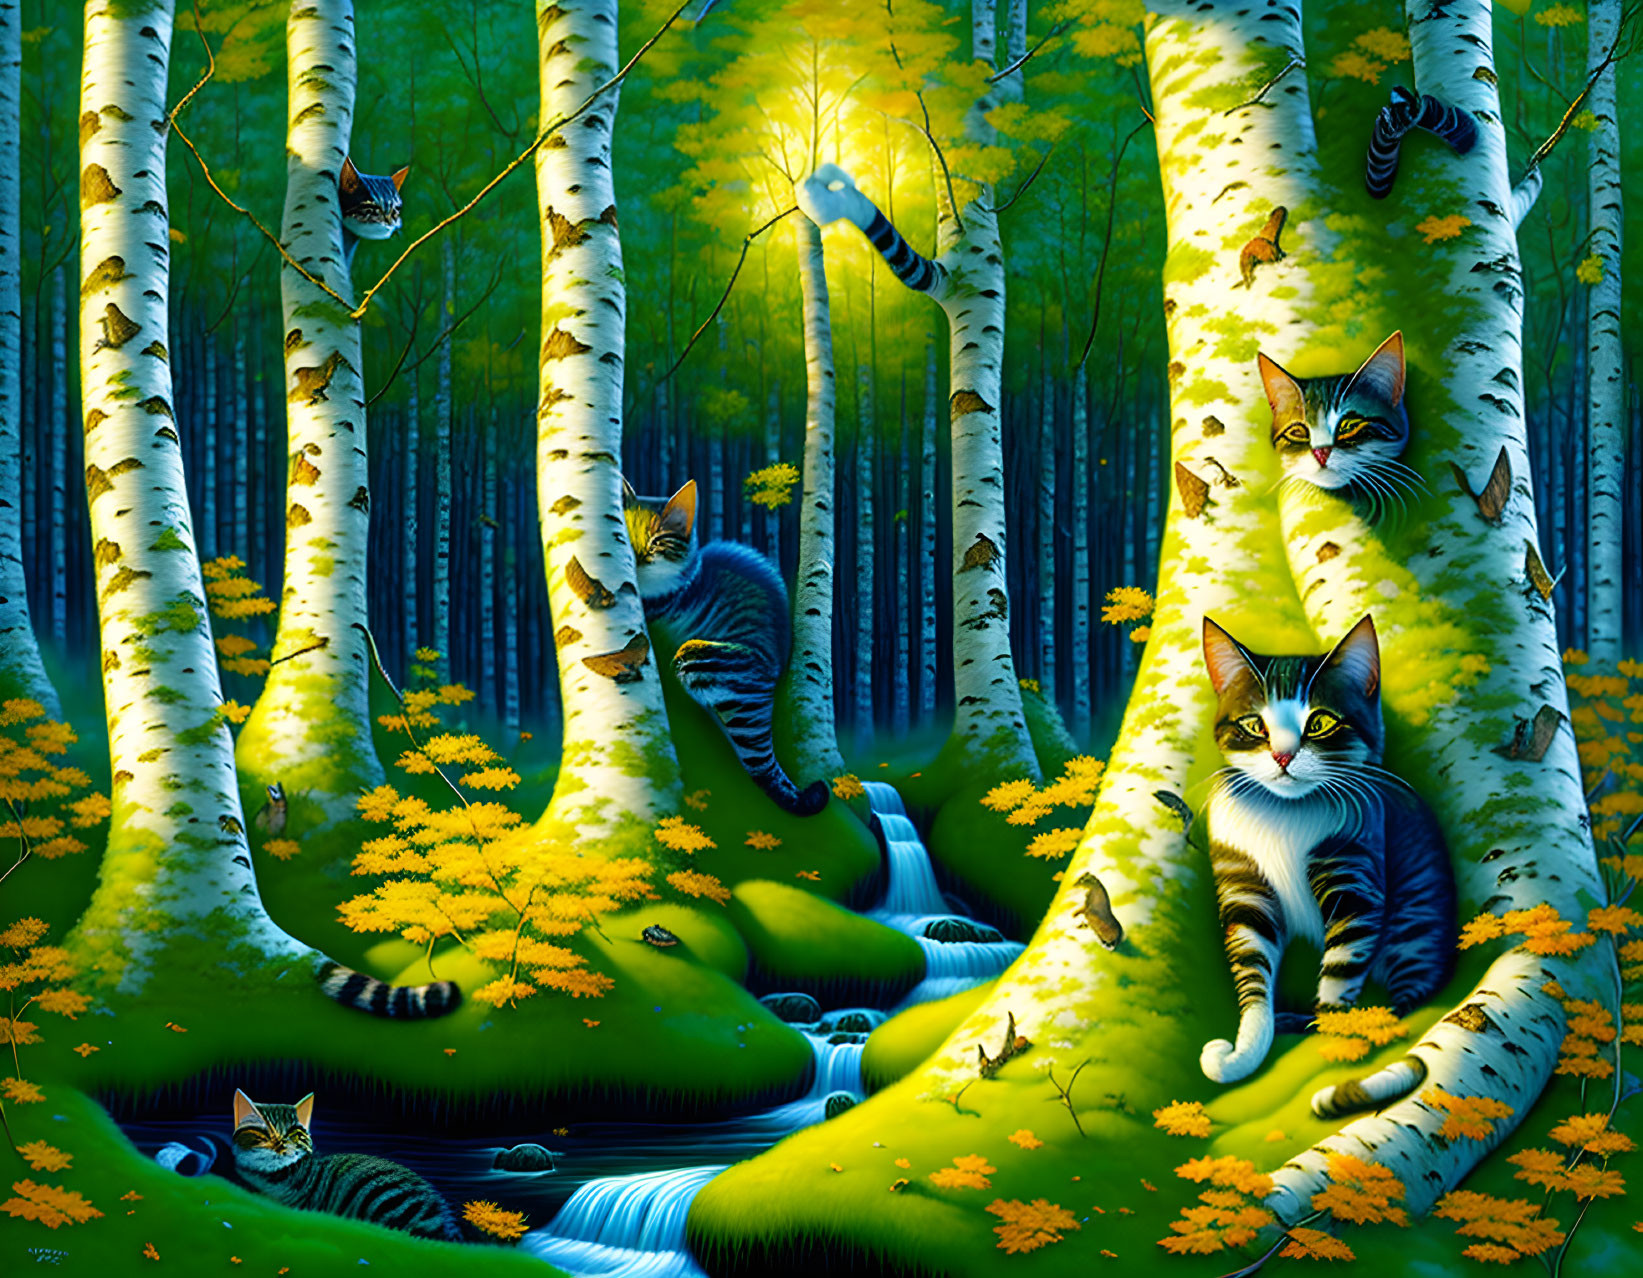 cats peeking out from trees, Birch forest, meadow,